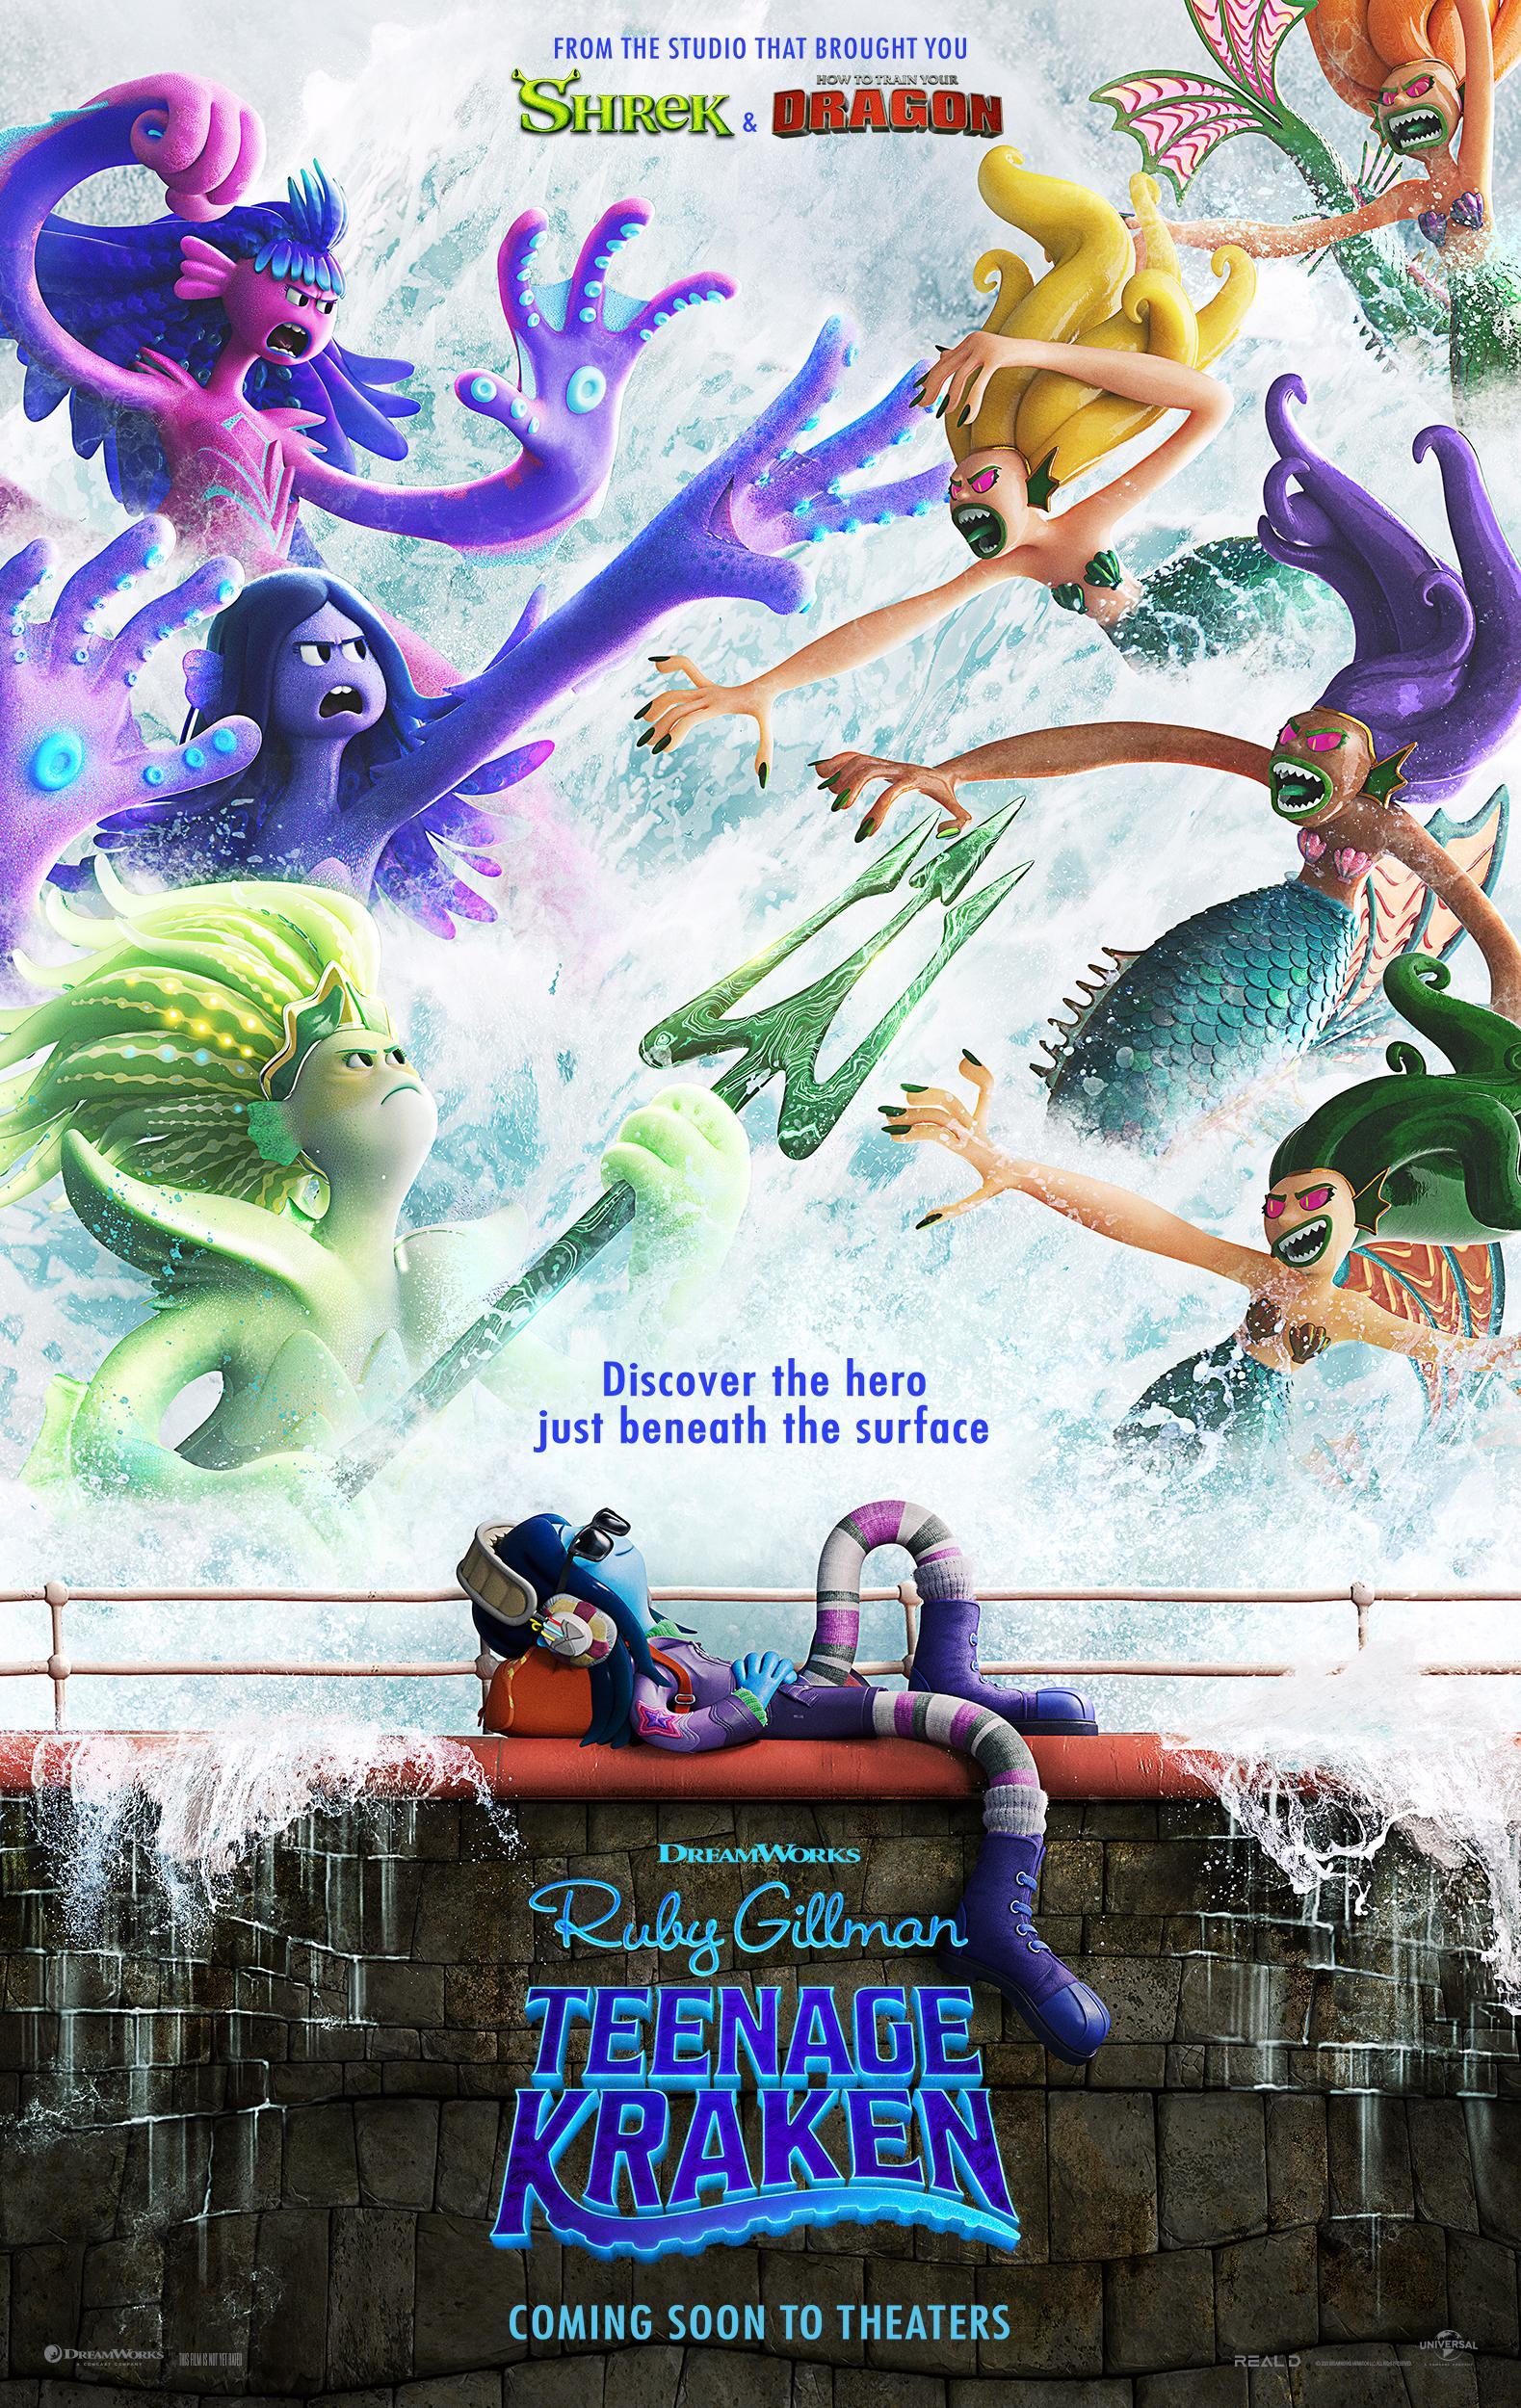 DreamWorks’ Latest Animated Movie, ‘Ruby Gillman, Teenage Kraken,’ Hits Theaters This Summer